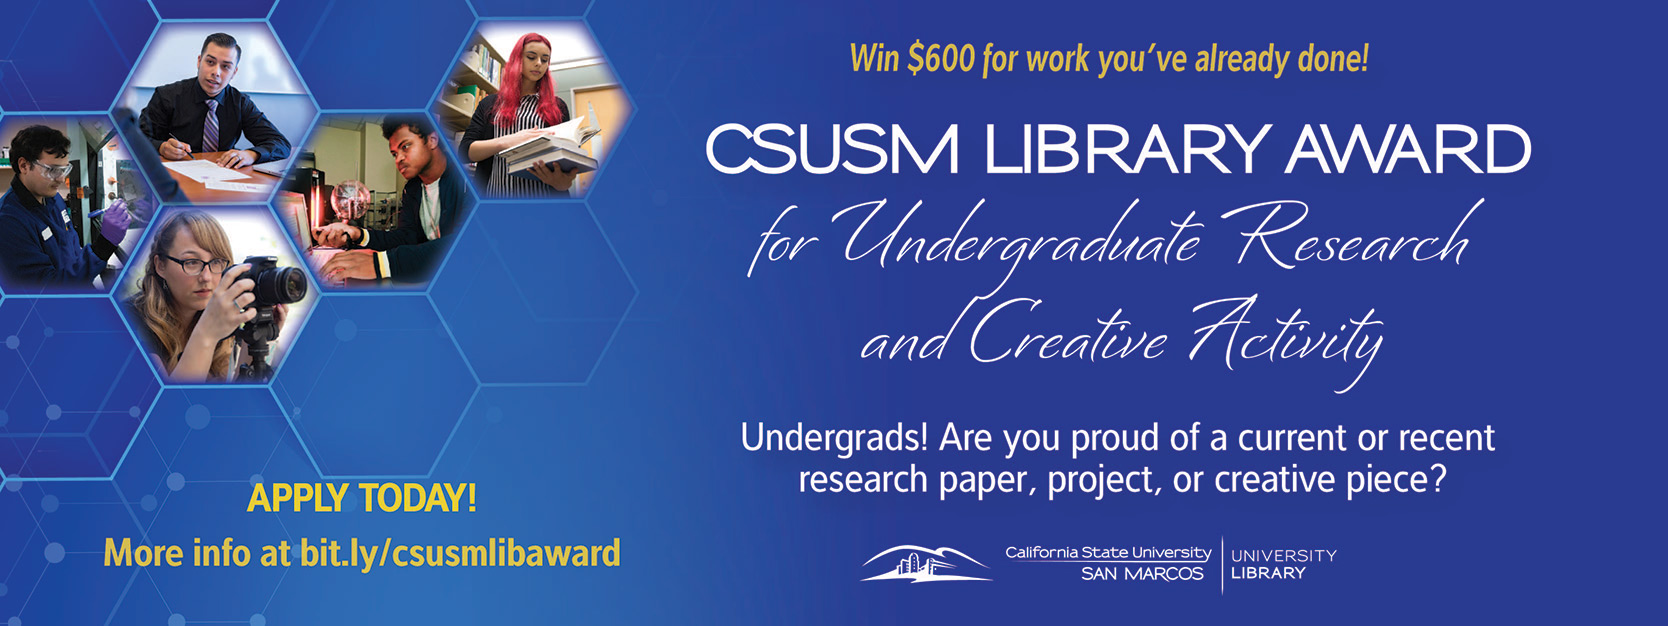 Image for the Spotlight on Apply for the Library Award for Undergraduate Research and Creative Activity